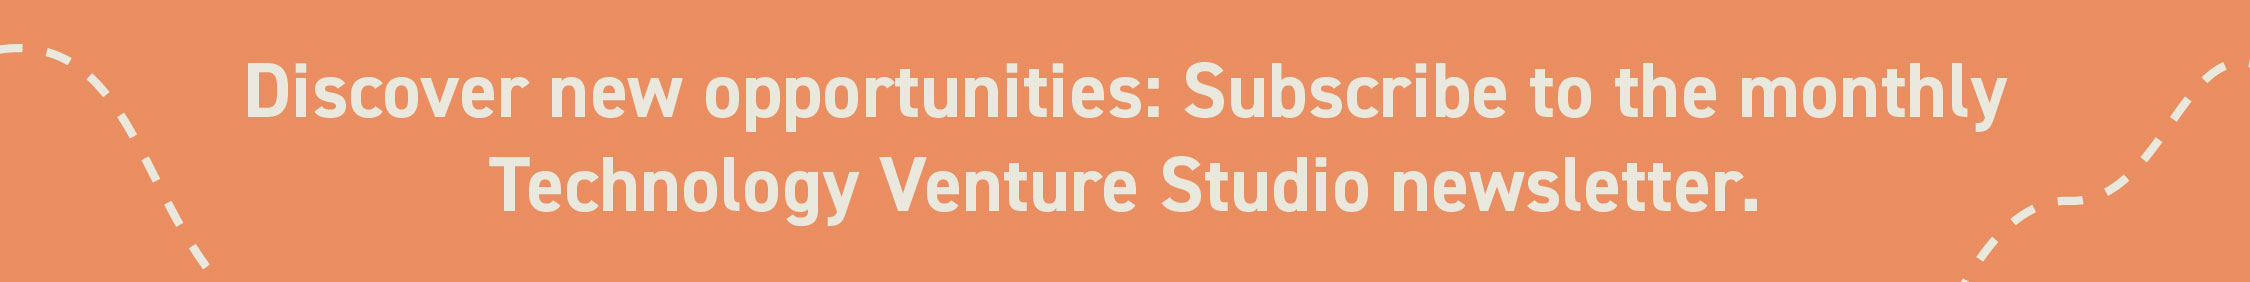 Discover new opportunities: Subscribe to the monthly Technology Venture Studio newsletter.